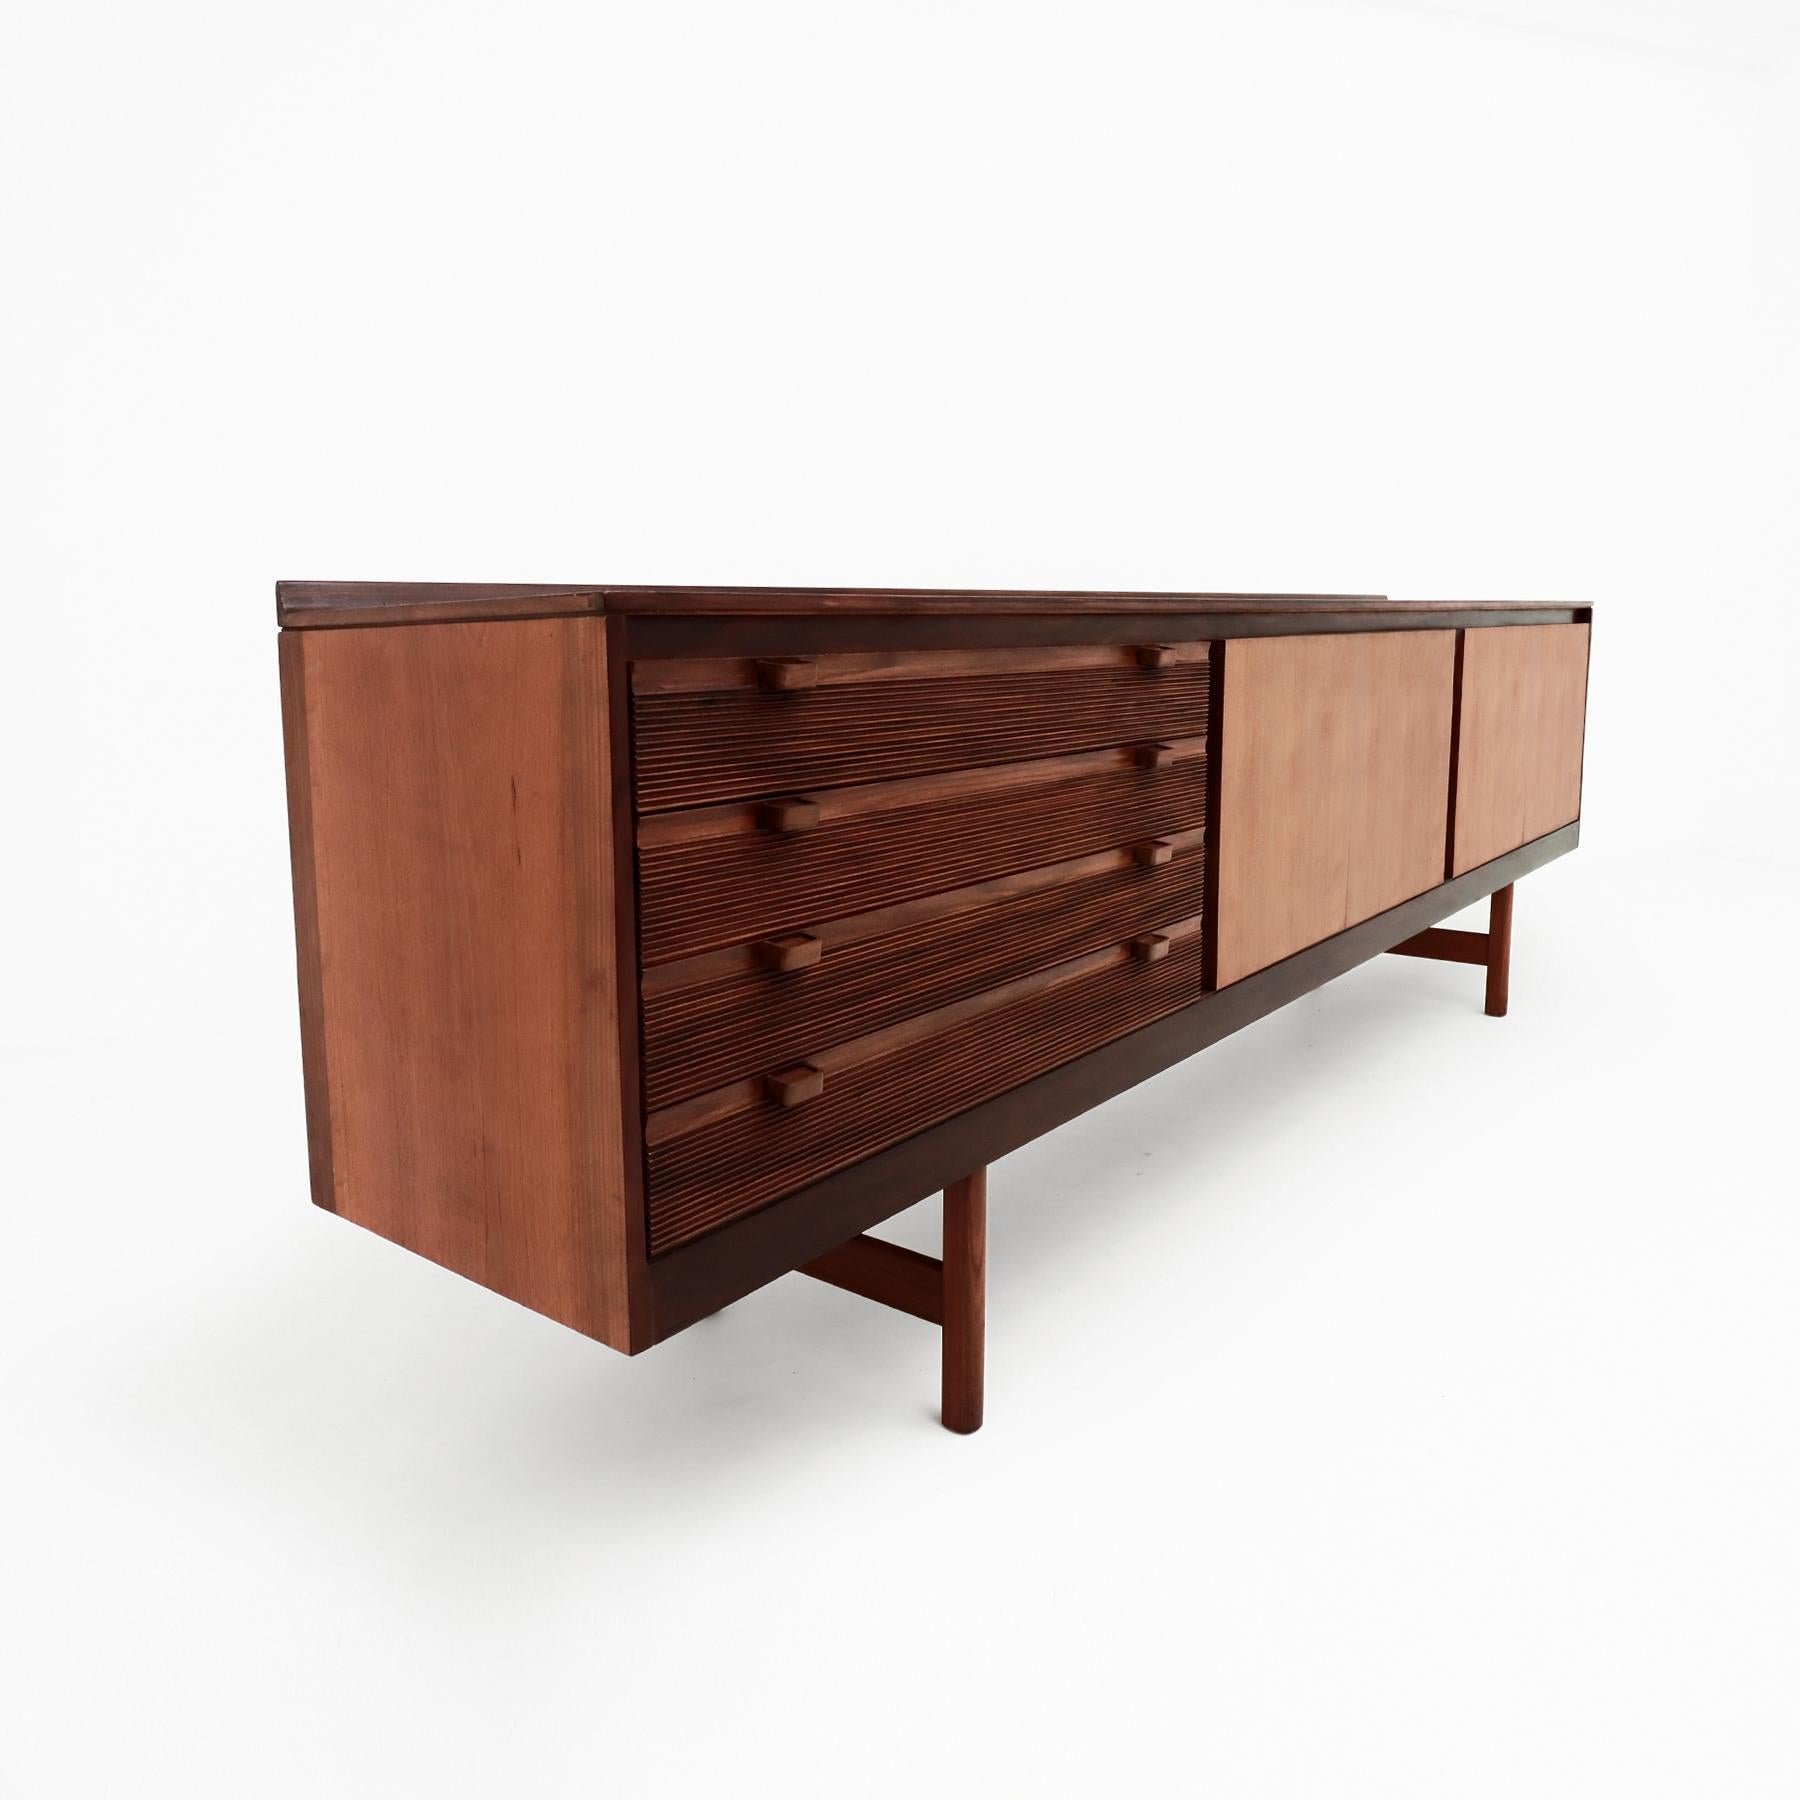 A very large Vintage Mid Century Teak, Afromosia and Sapele Knighstbridge sideboard/credenza designed by Robert Heritage for Archie Shine.

Standing at just over 244cm in length the Knightsbridge really was the Grand Daddy of all Heritage’s amazing